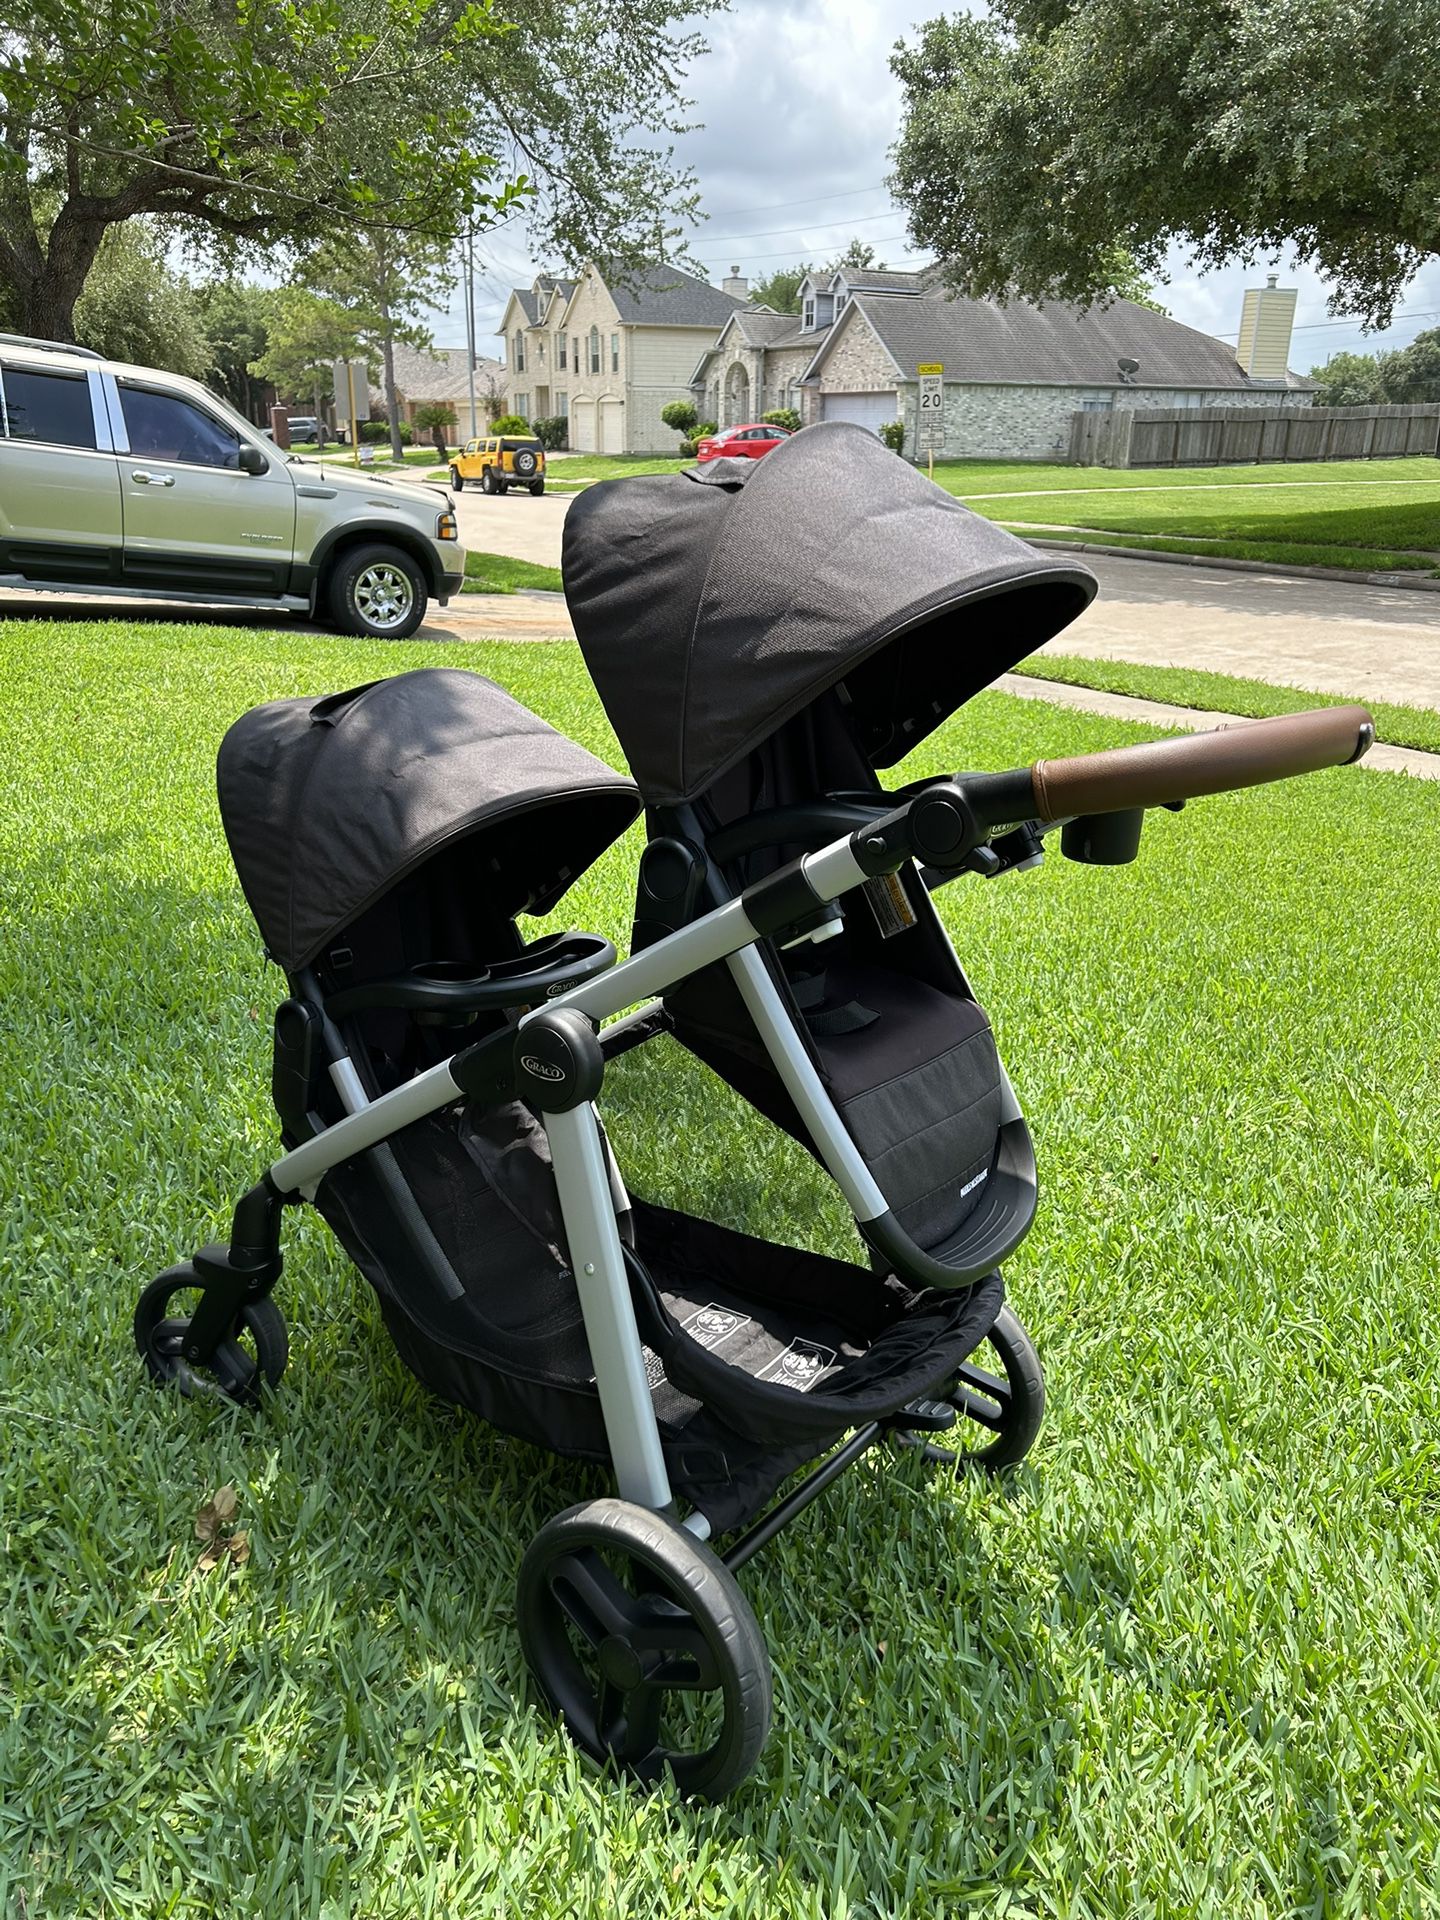 Gravo Nest2grow Baby Stroller With Second Seat 